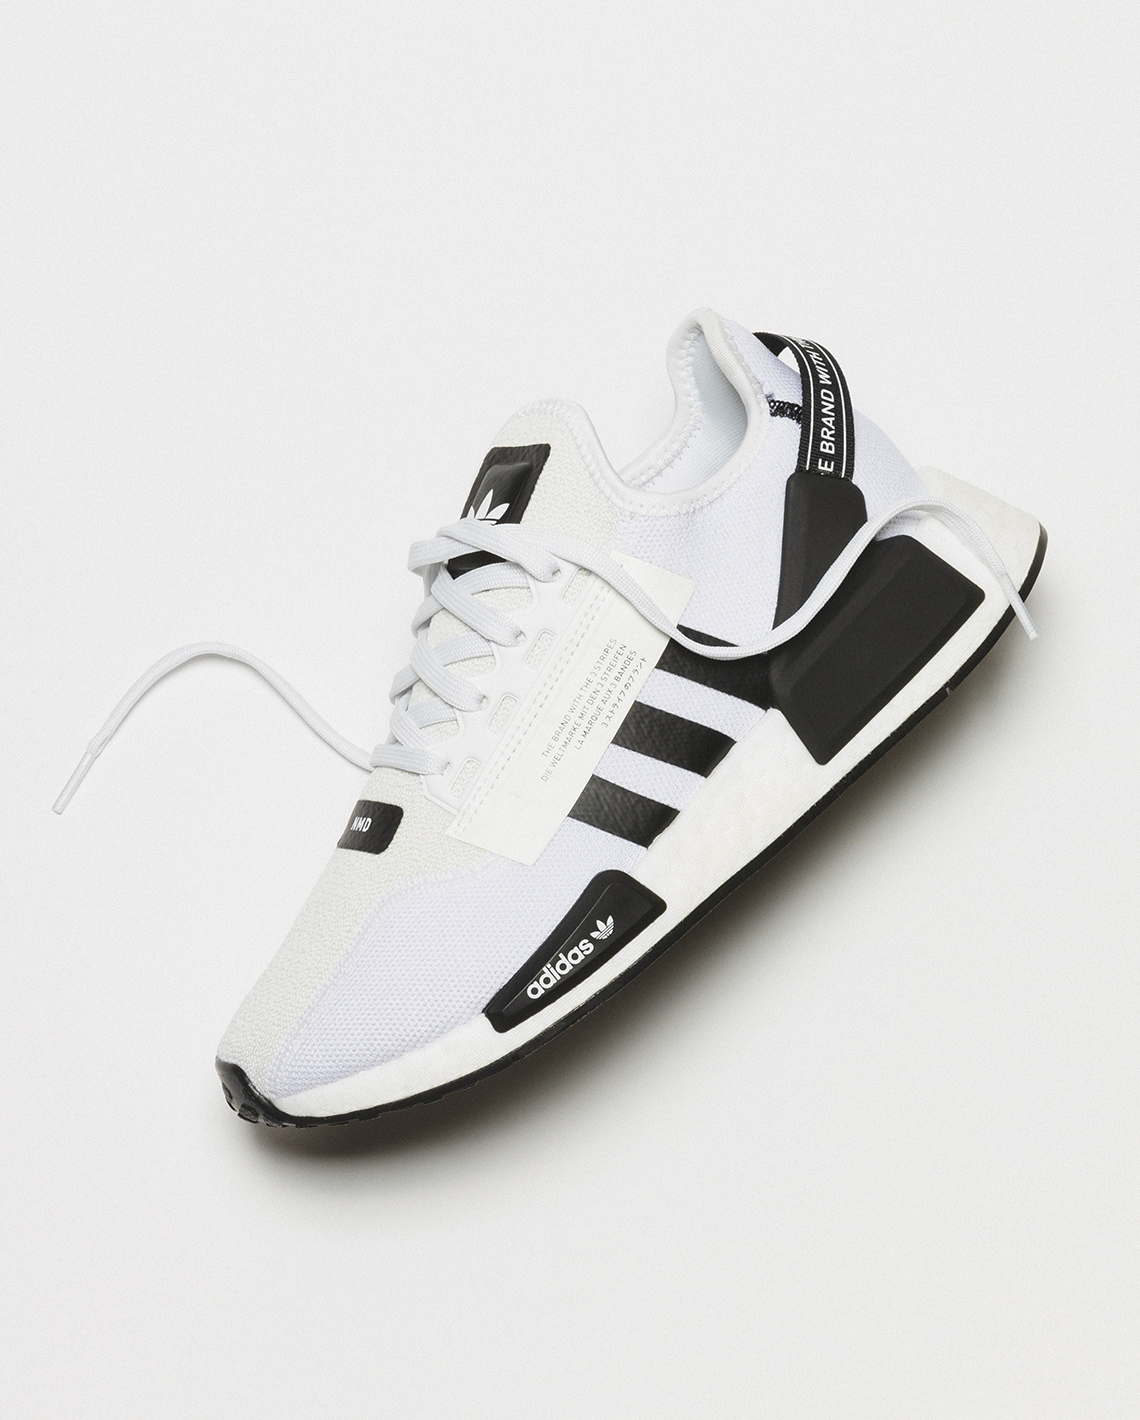 Adidas Shopping Guide March 2022 Footwear Nmd Gallery 3